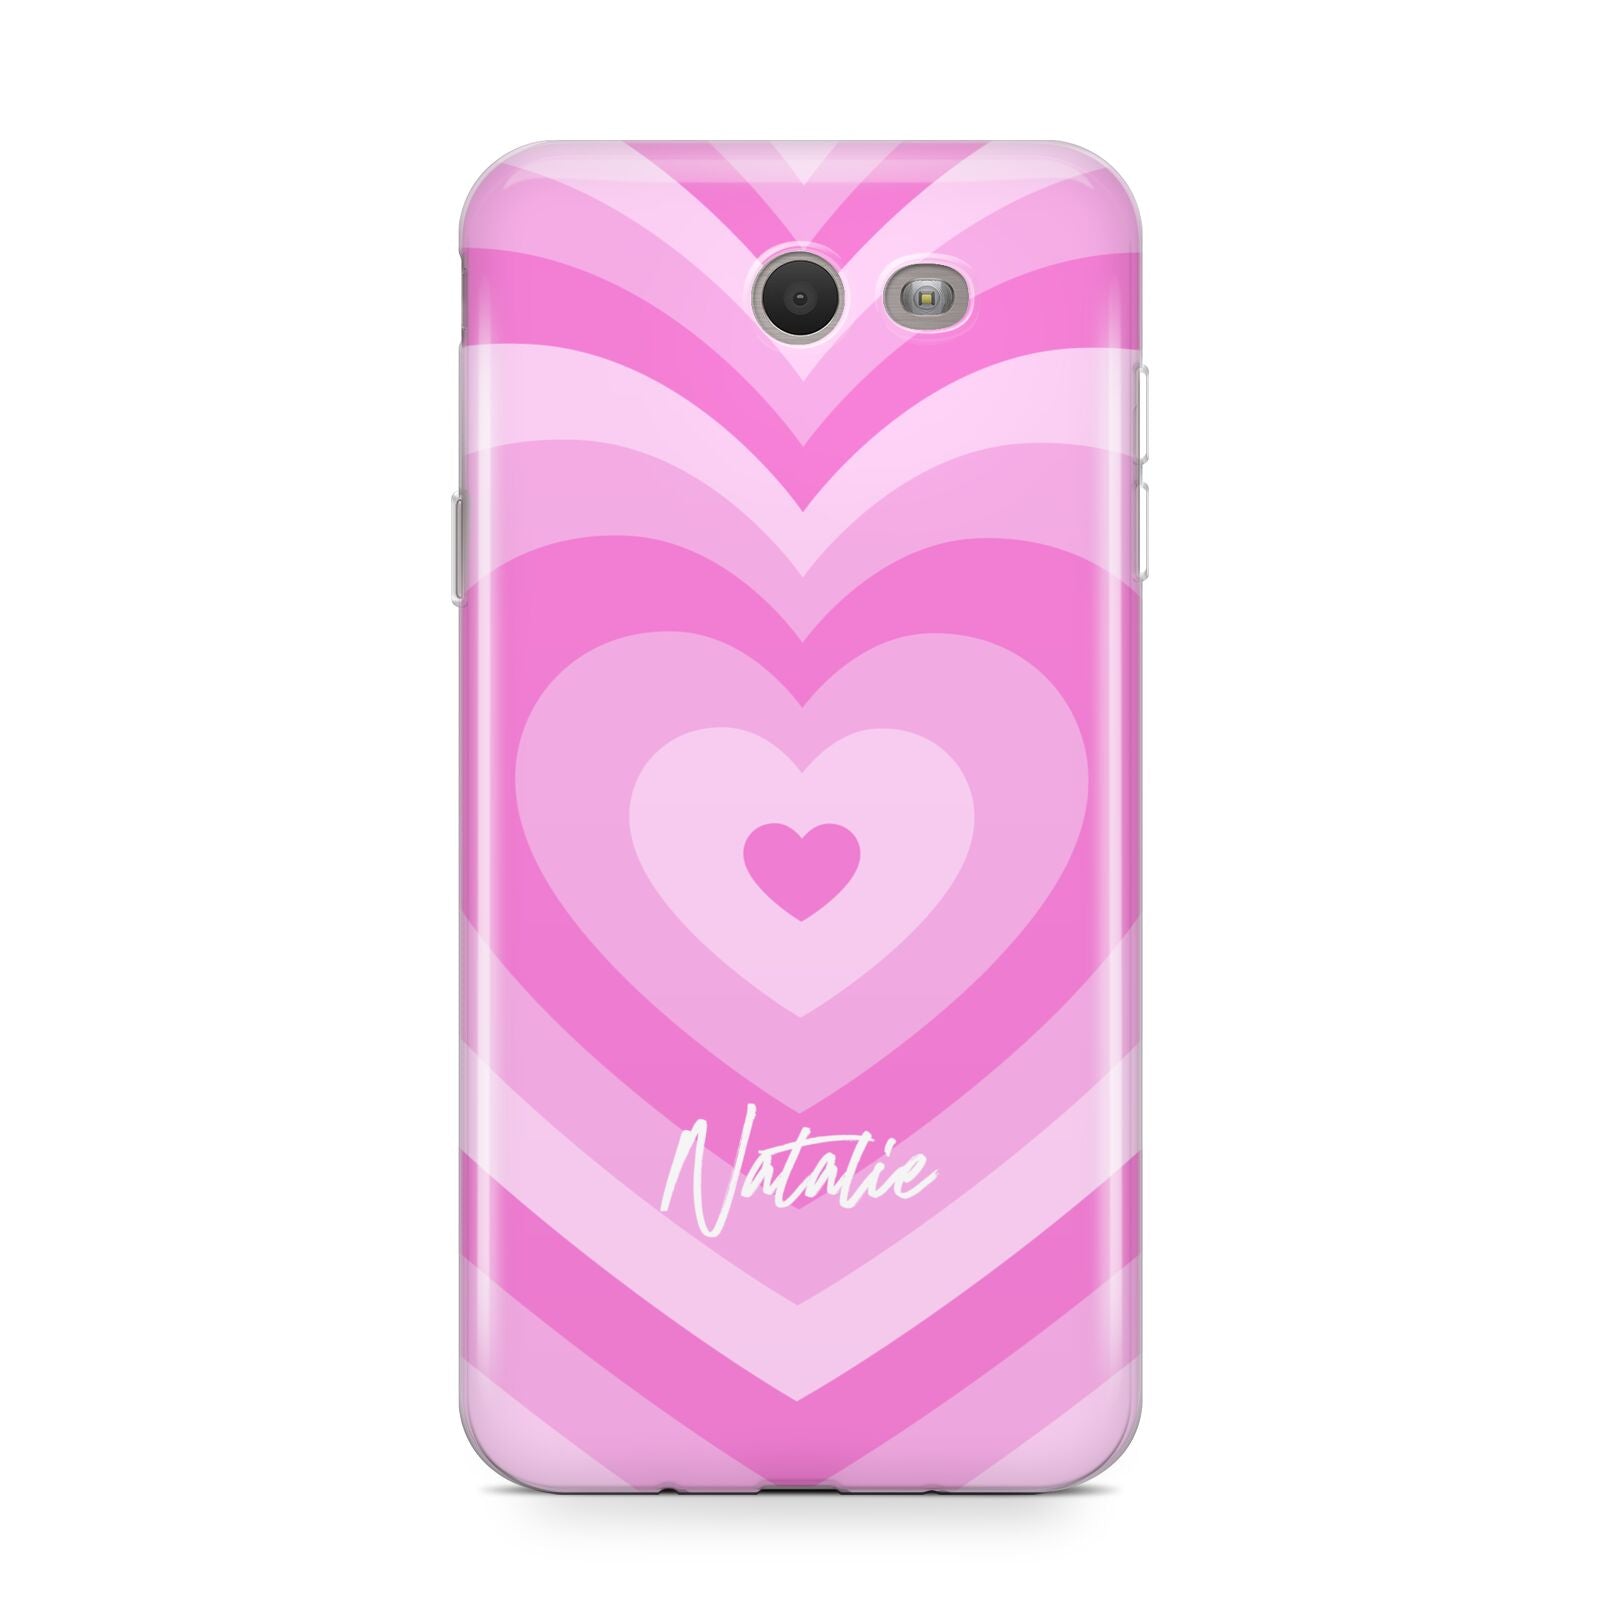 Personalised Pink Heart Samsung Galaxy J7 2017 Case